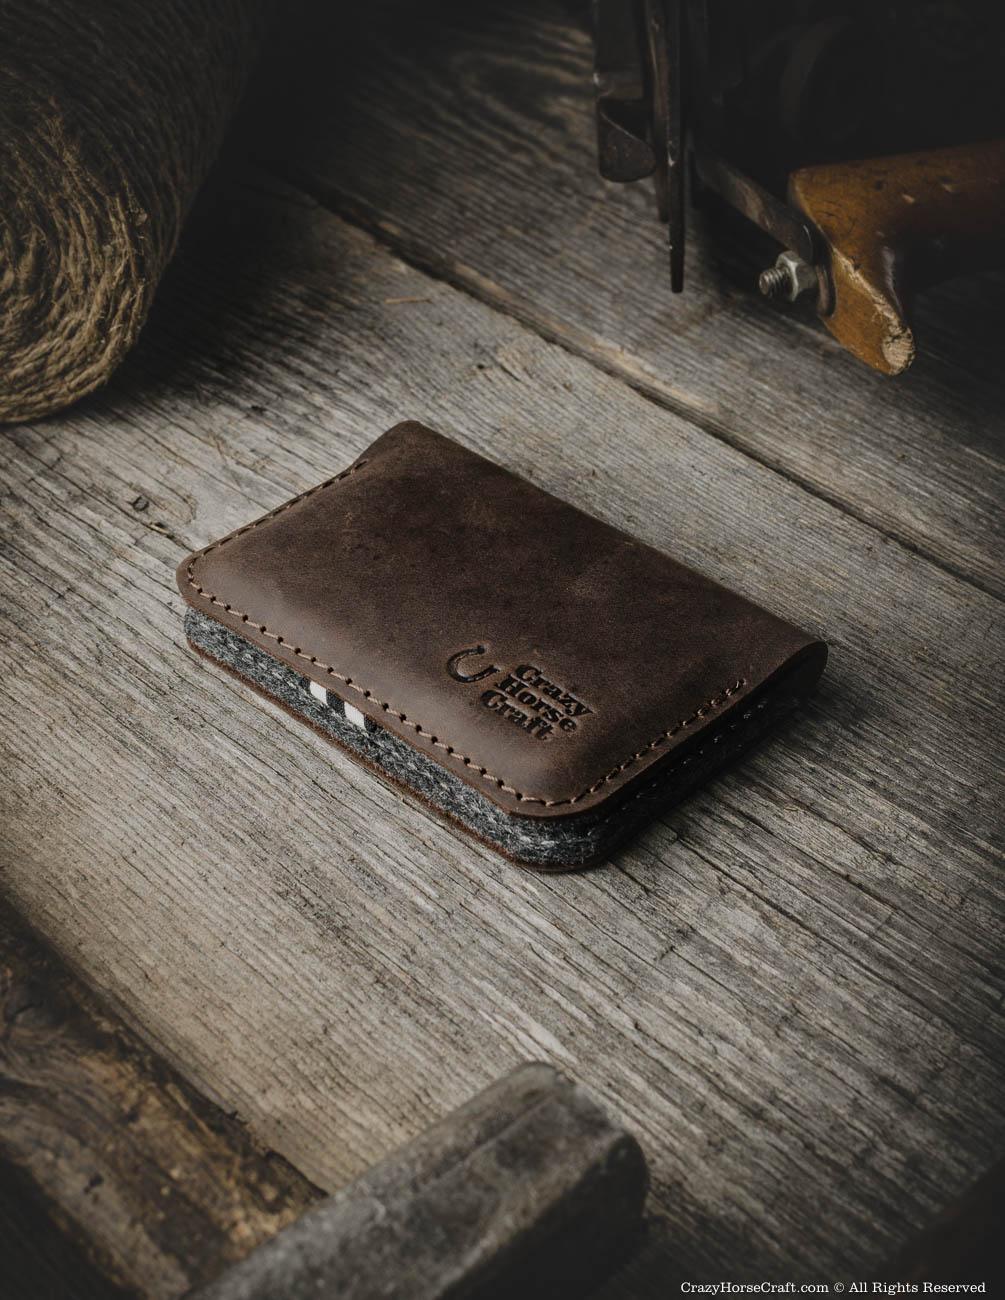 Leather Business & Credit Card Holder / Wallet | Wood Brown